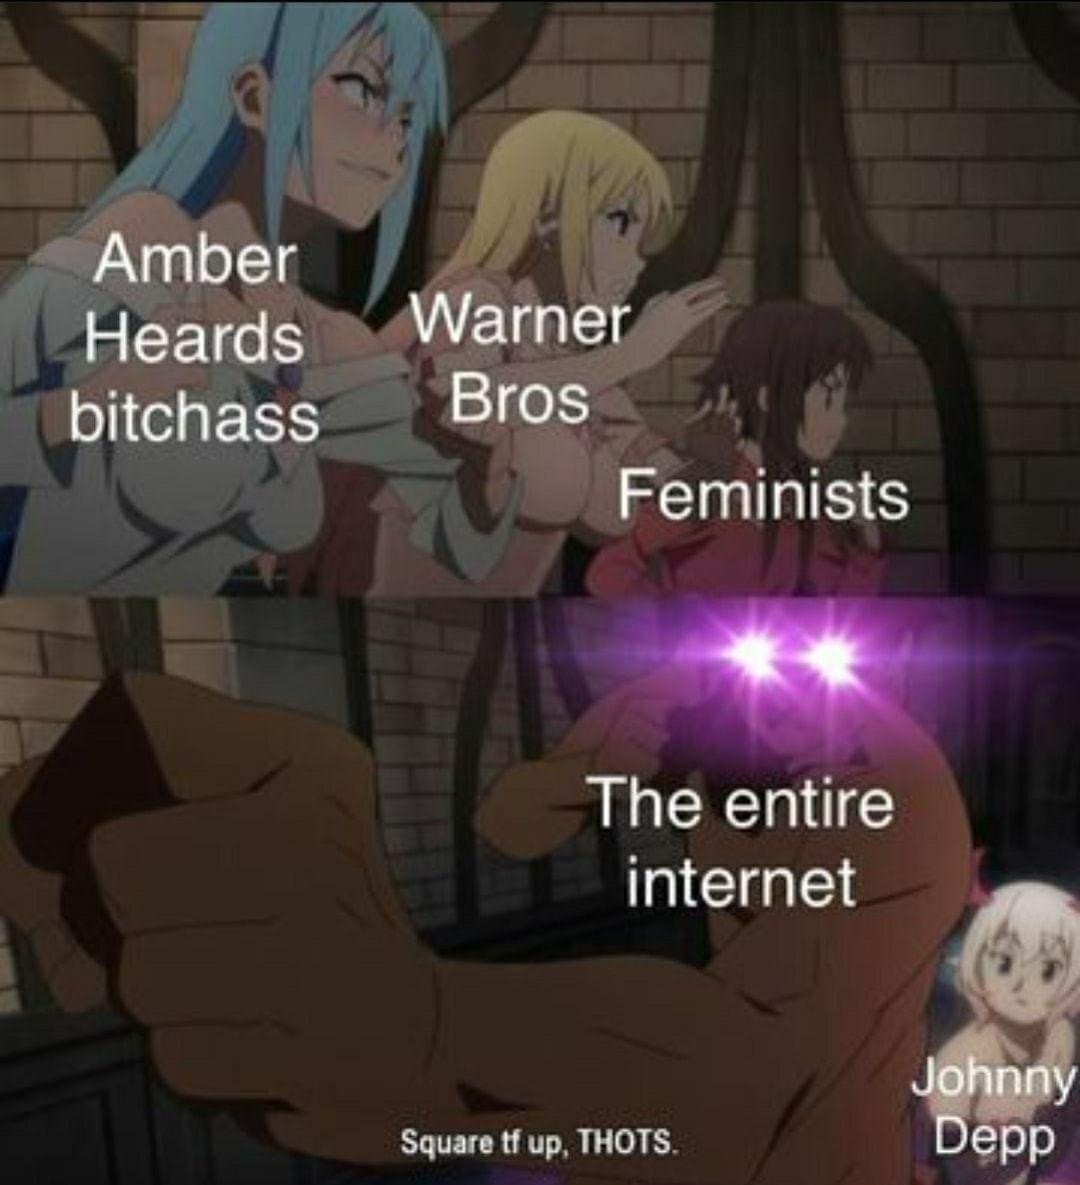 square the fuck up thots - Amber Heards Warner bitchass Bros Feminists The entire internet Johnny Depp Square tf up, Thots